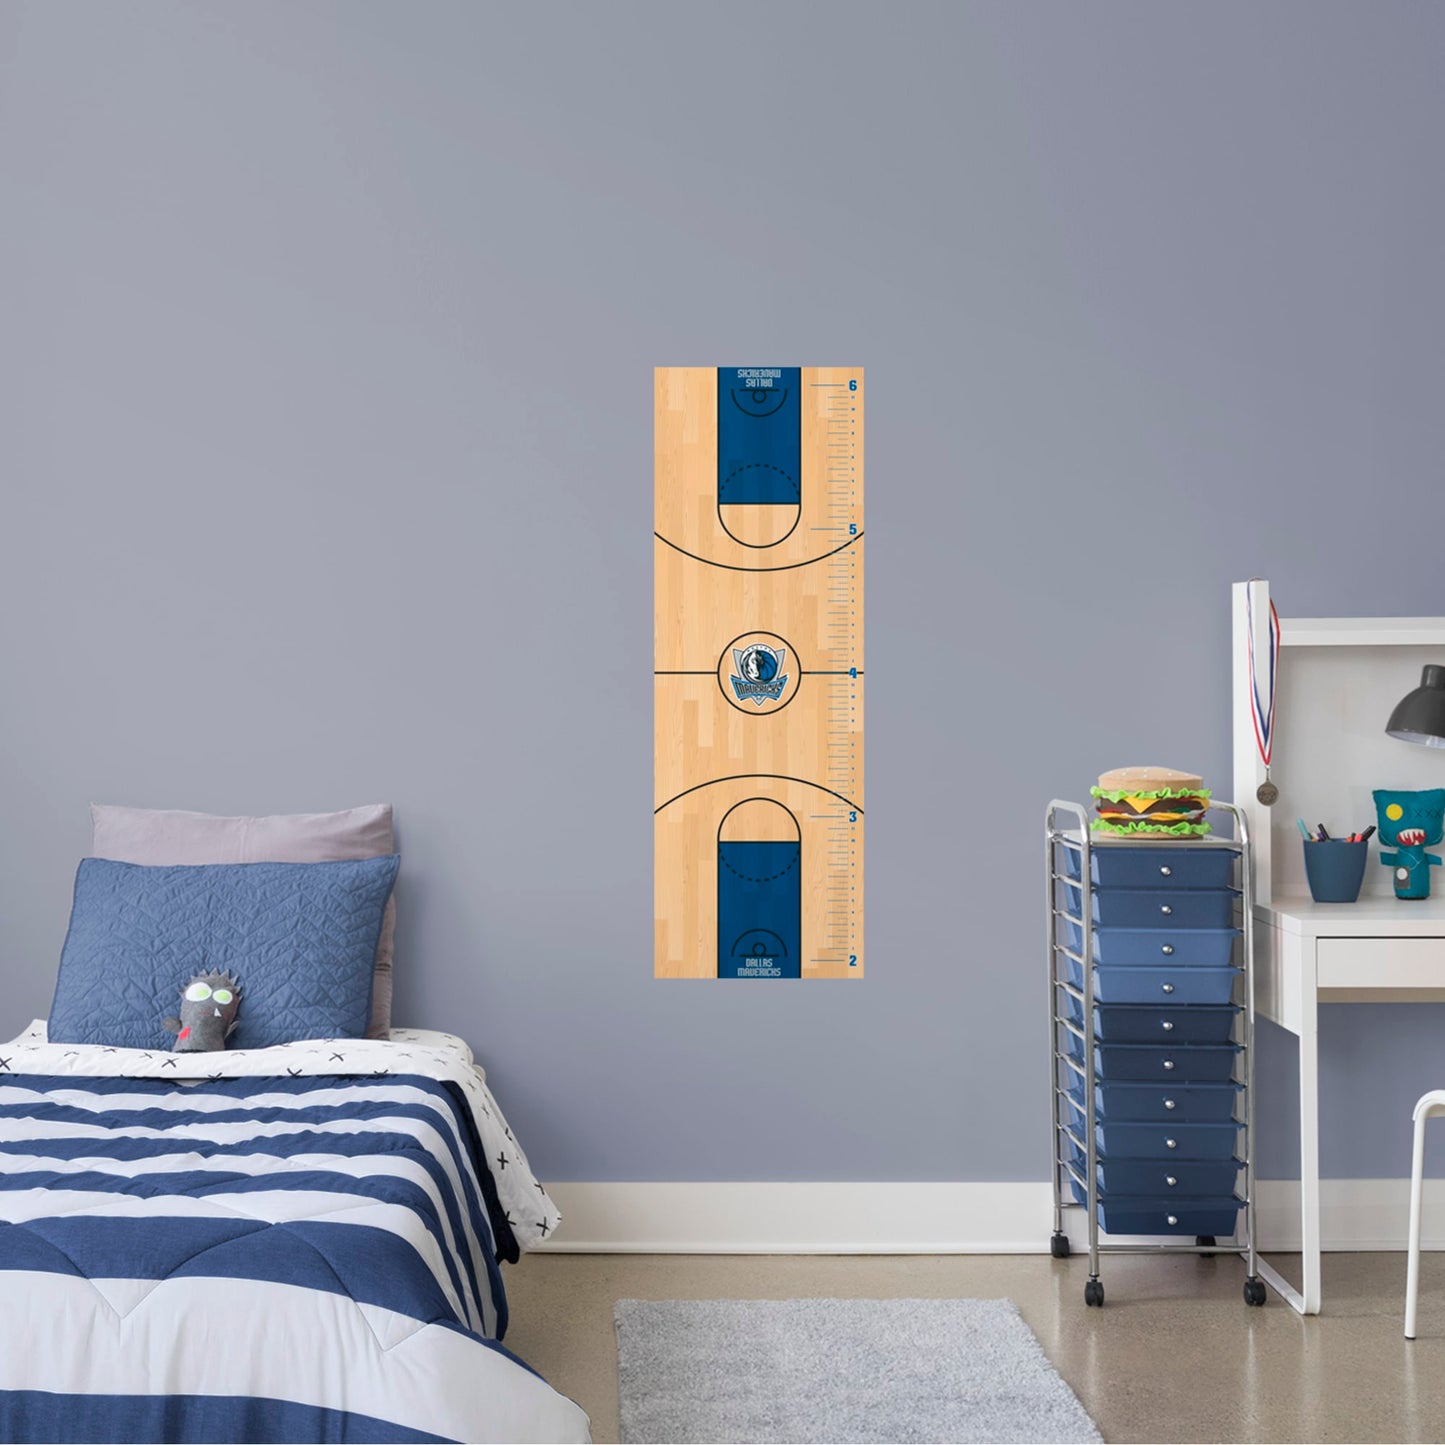 Dallas Mavericks: Growth Chart - Officially Licensed NBA Removable Wall Decal